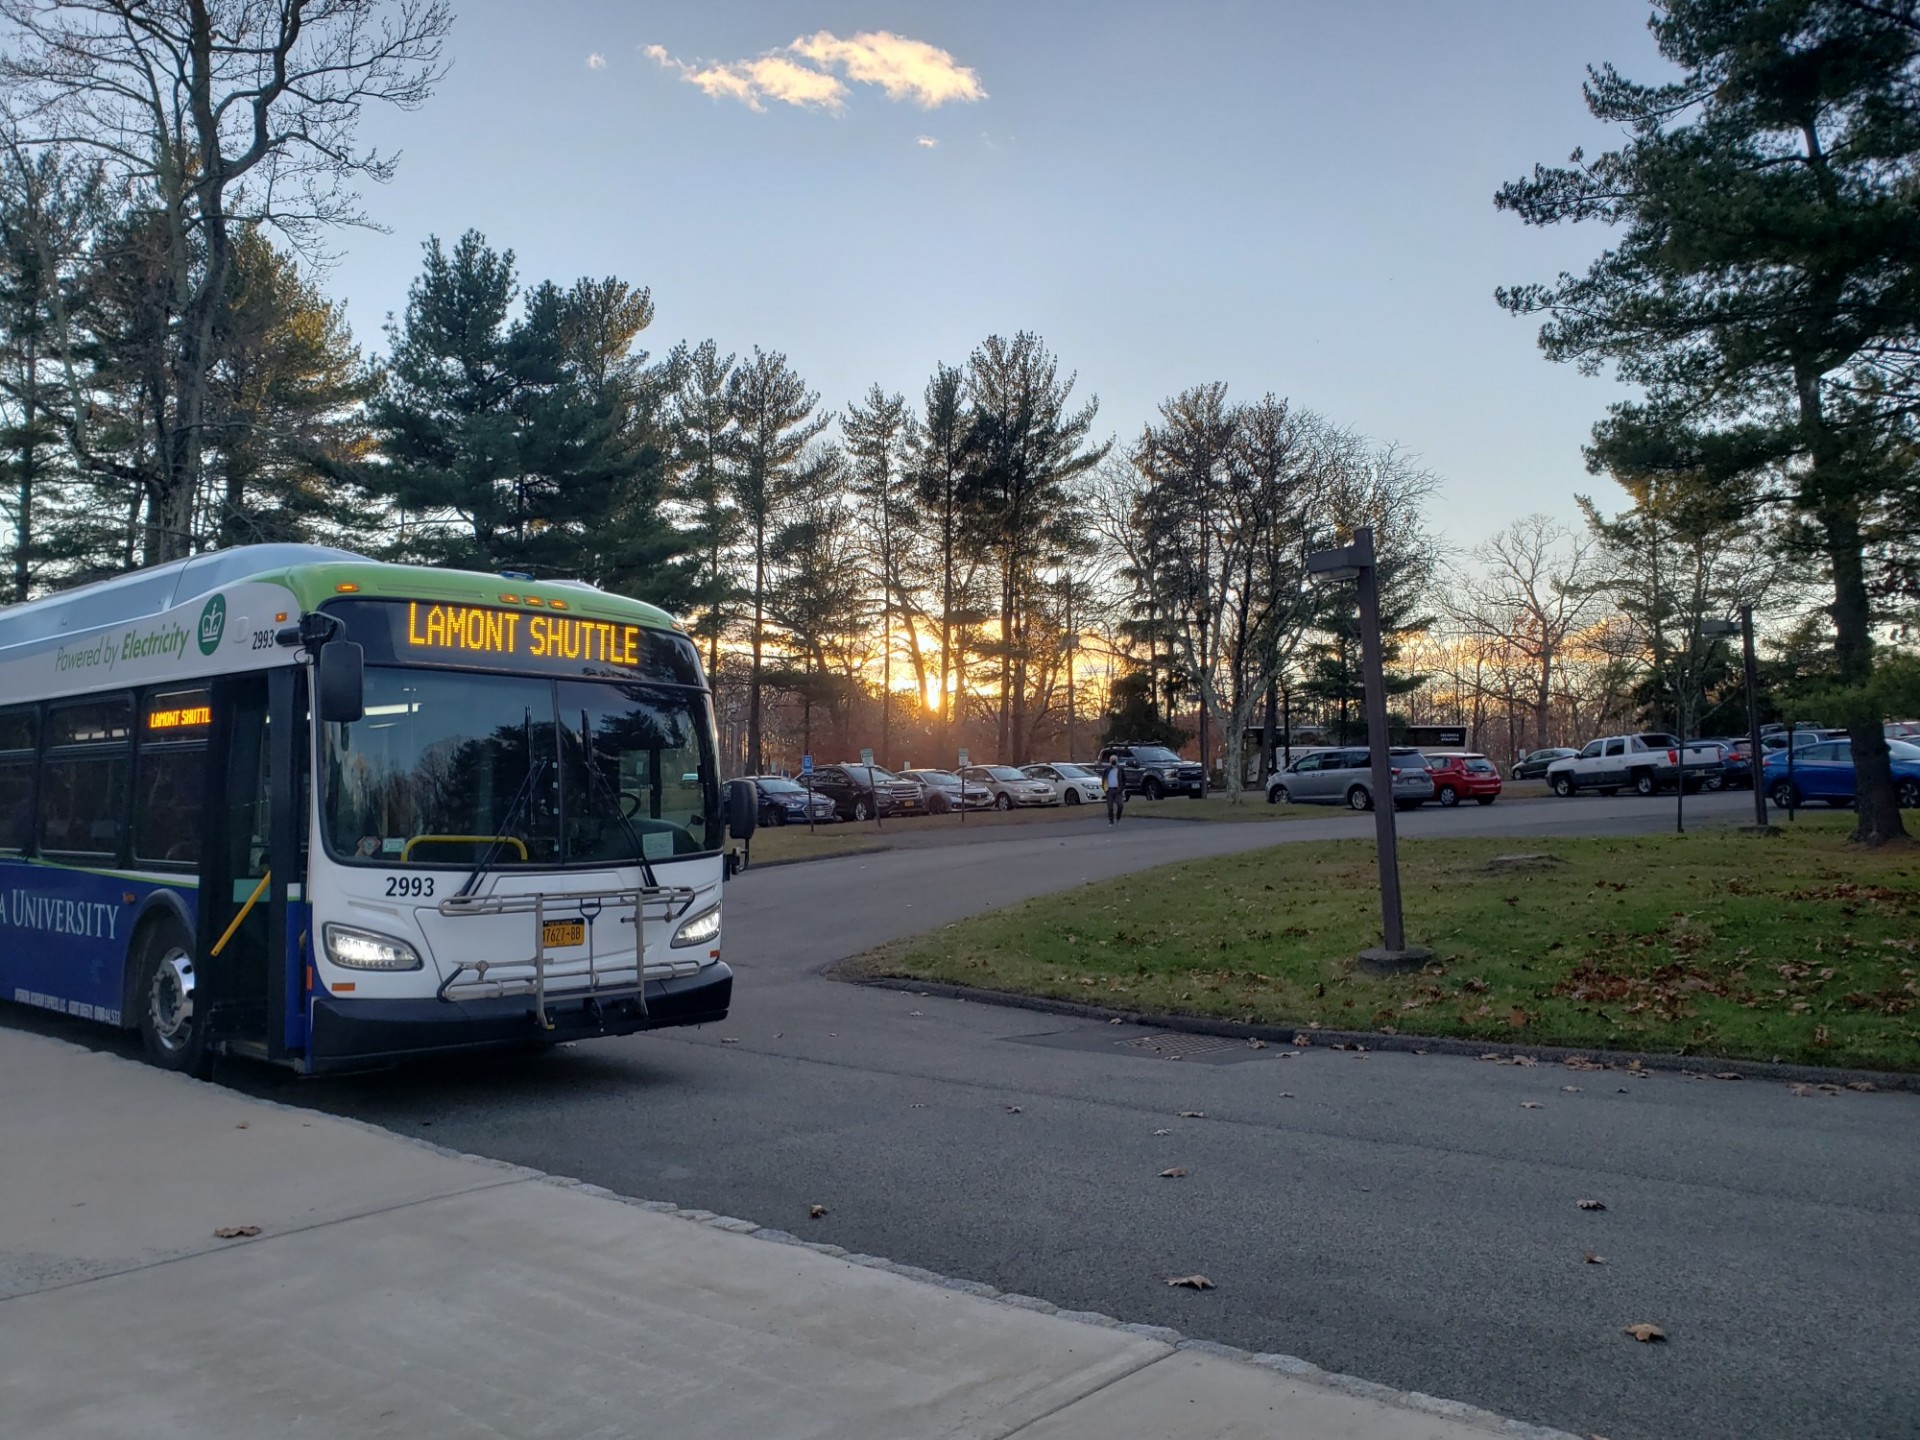 Lamont shuttle waits in the parking lot at Lamont campus